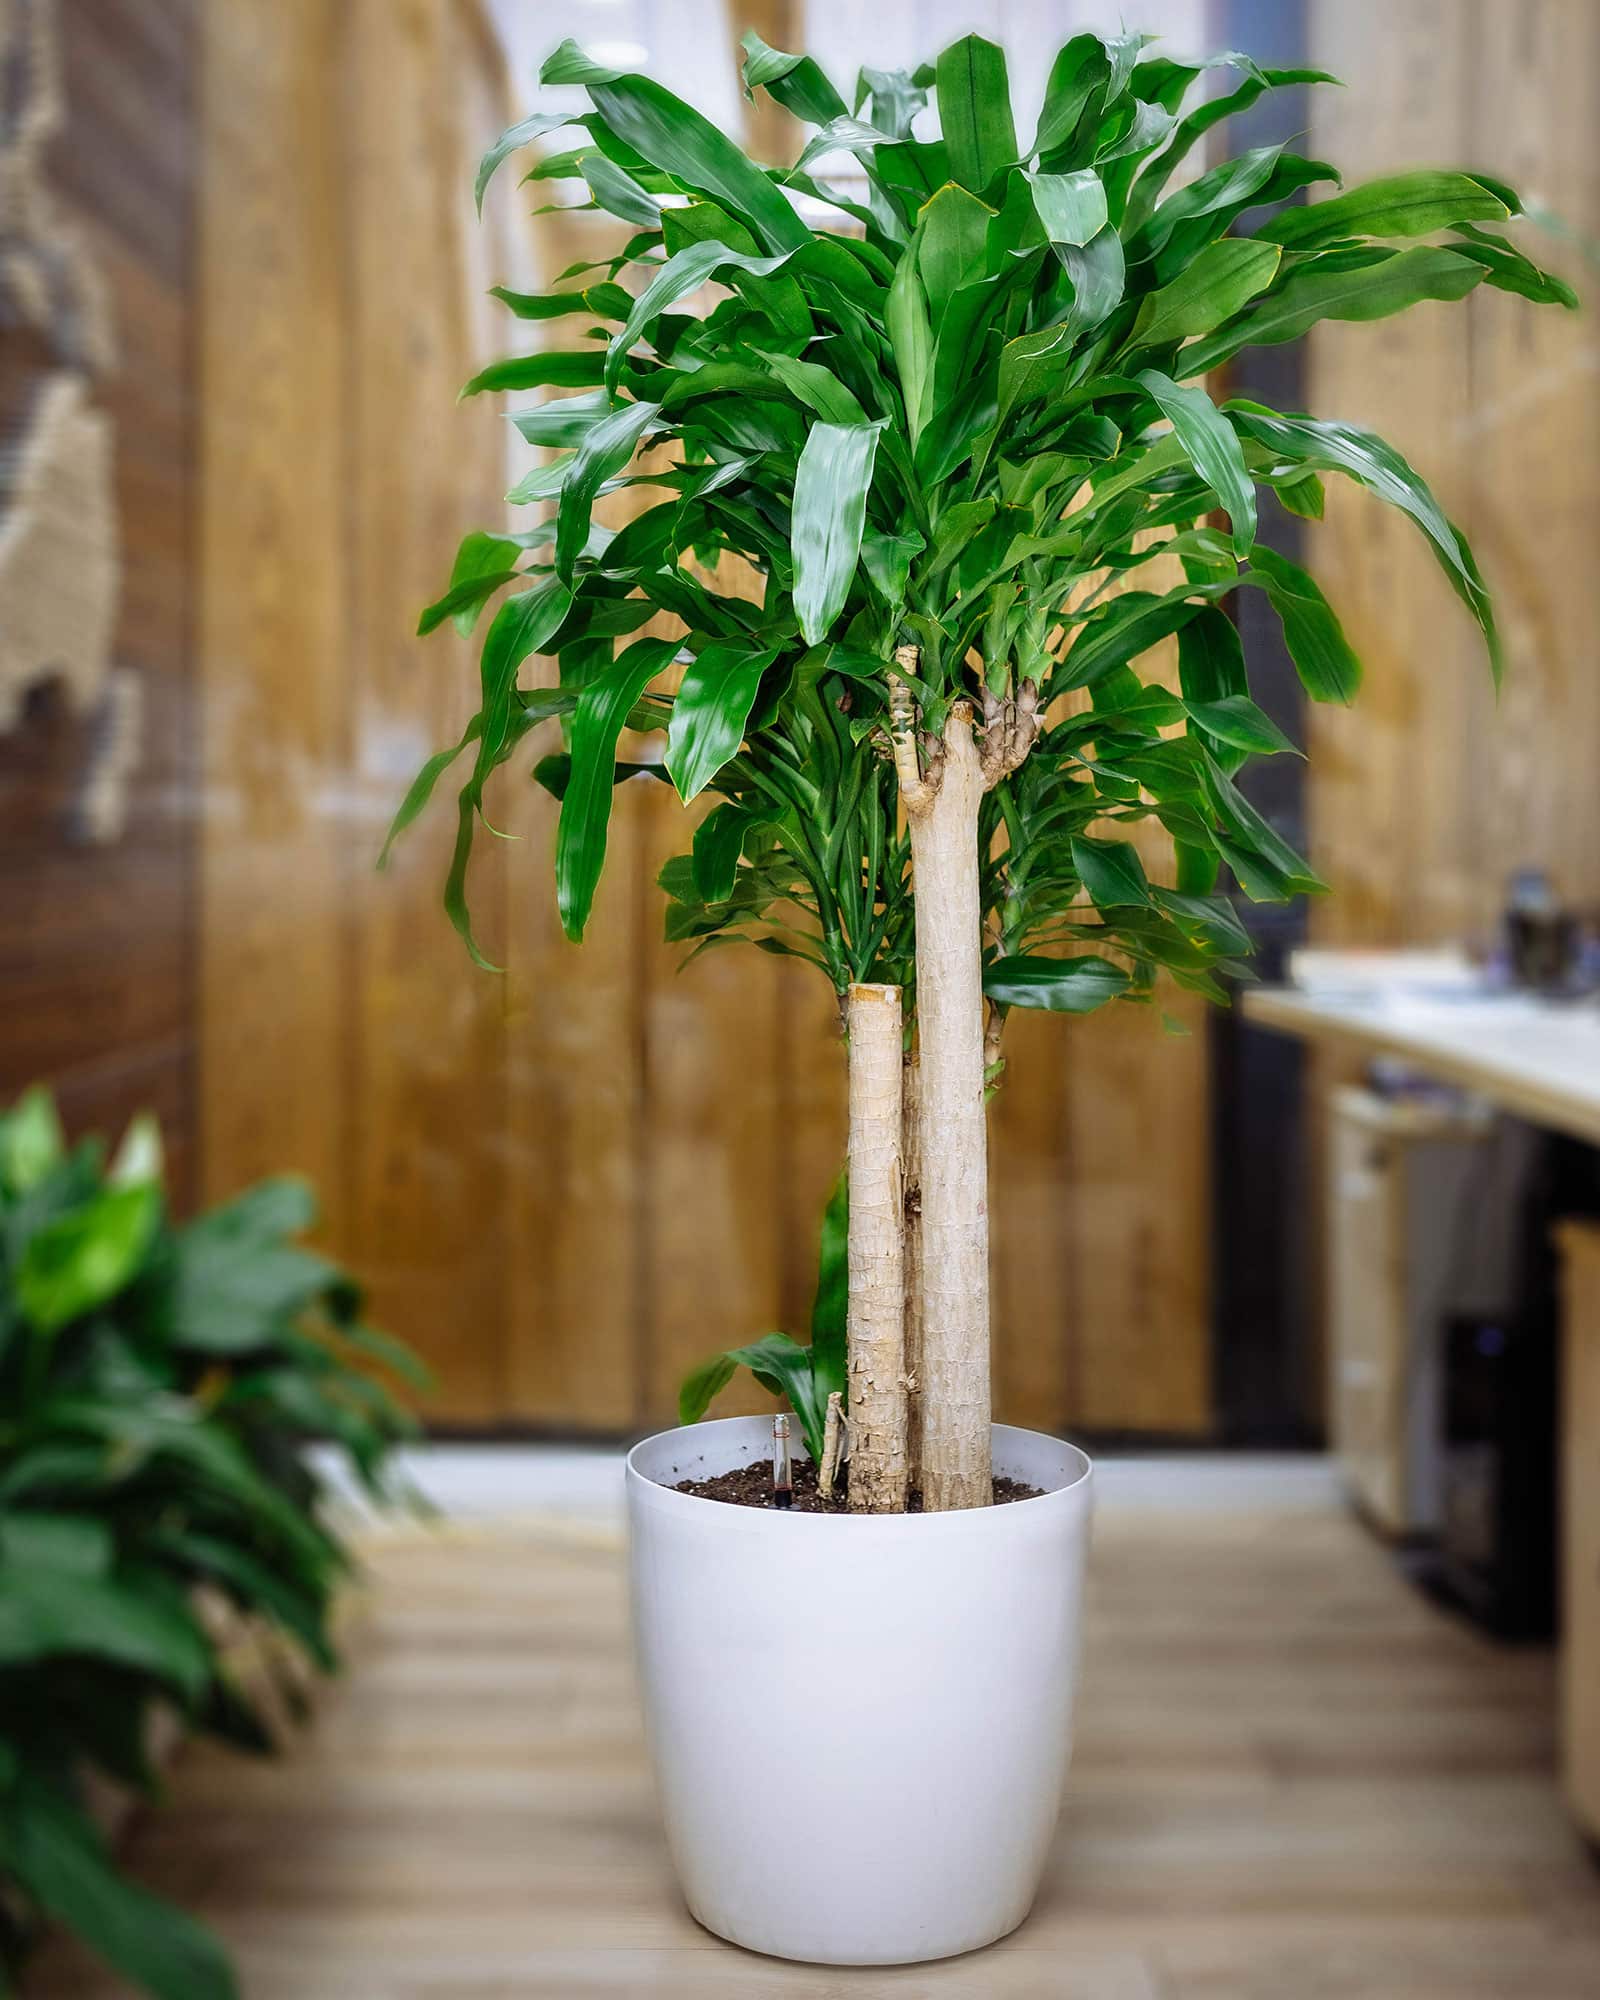 Large money tree (Pachira aquatica) with a regular straight stem in a white pot